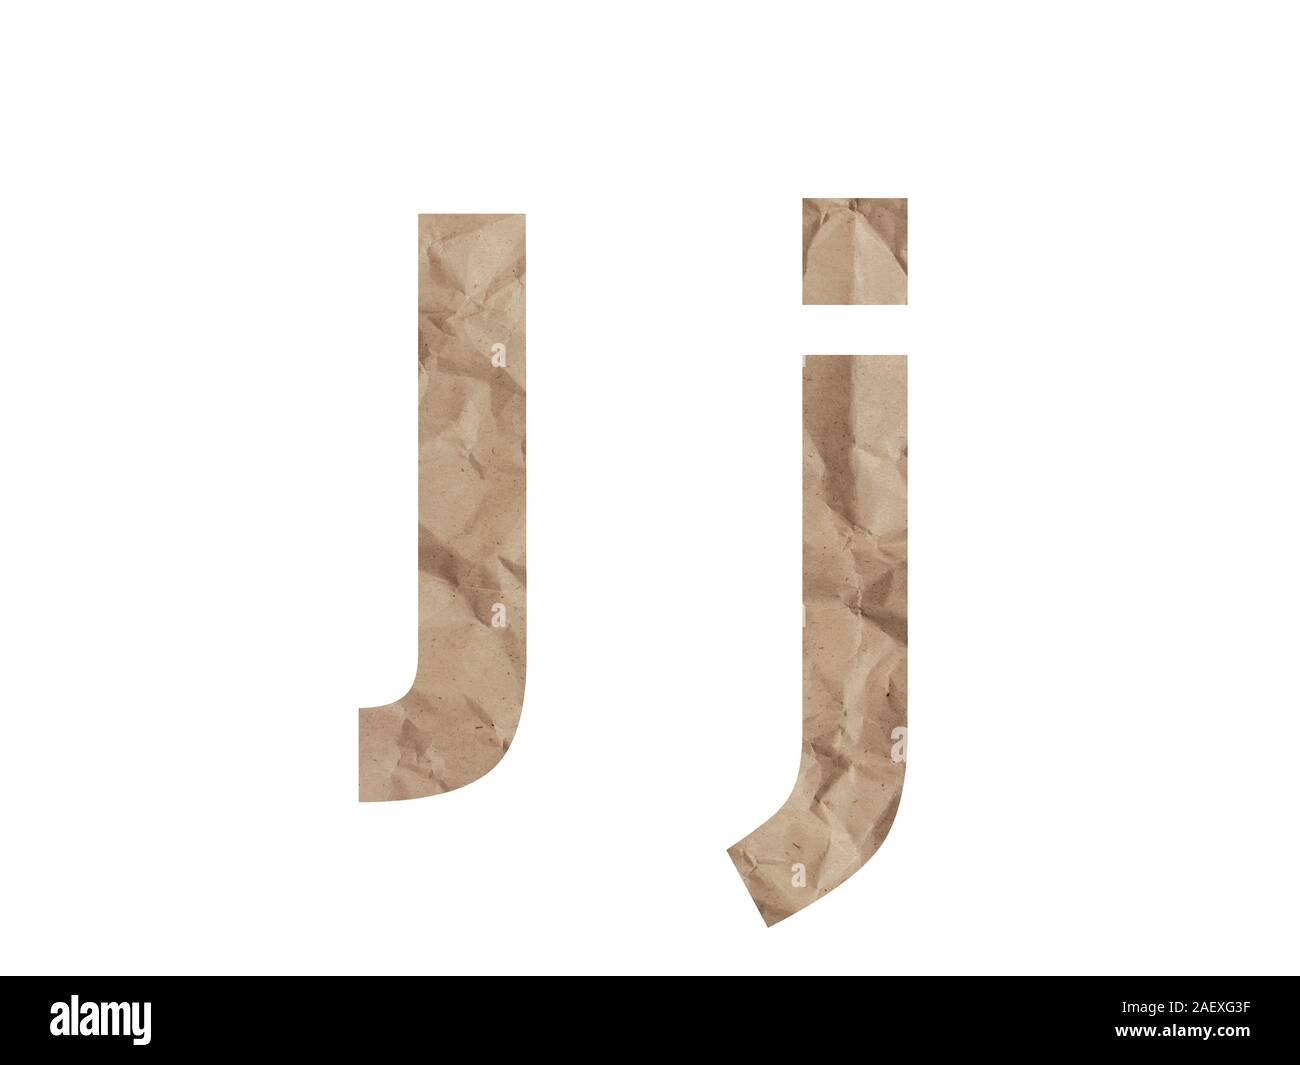 Letter J font alphabet Lettring isolated on white. Crumpled wrapping paper textured effect, crease crack bruising. Isolate paper uppercase lowercase Stock Photo